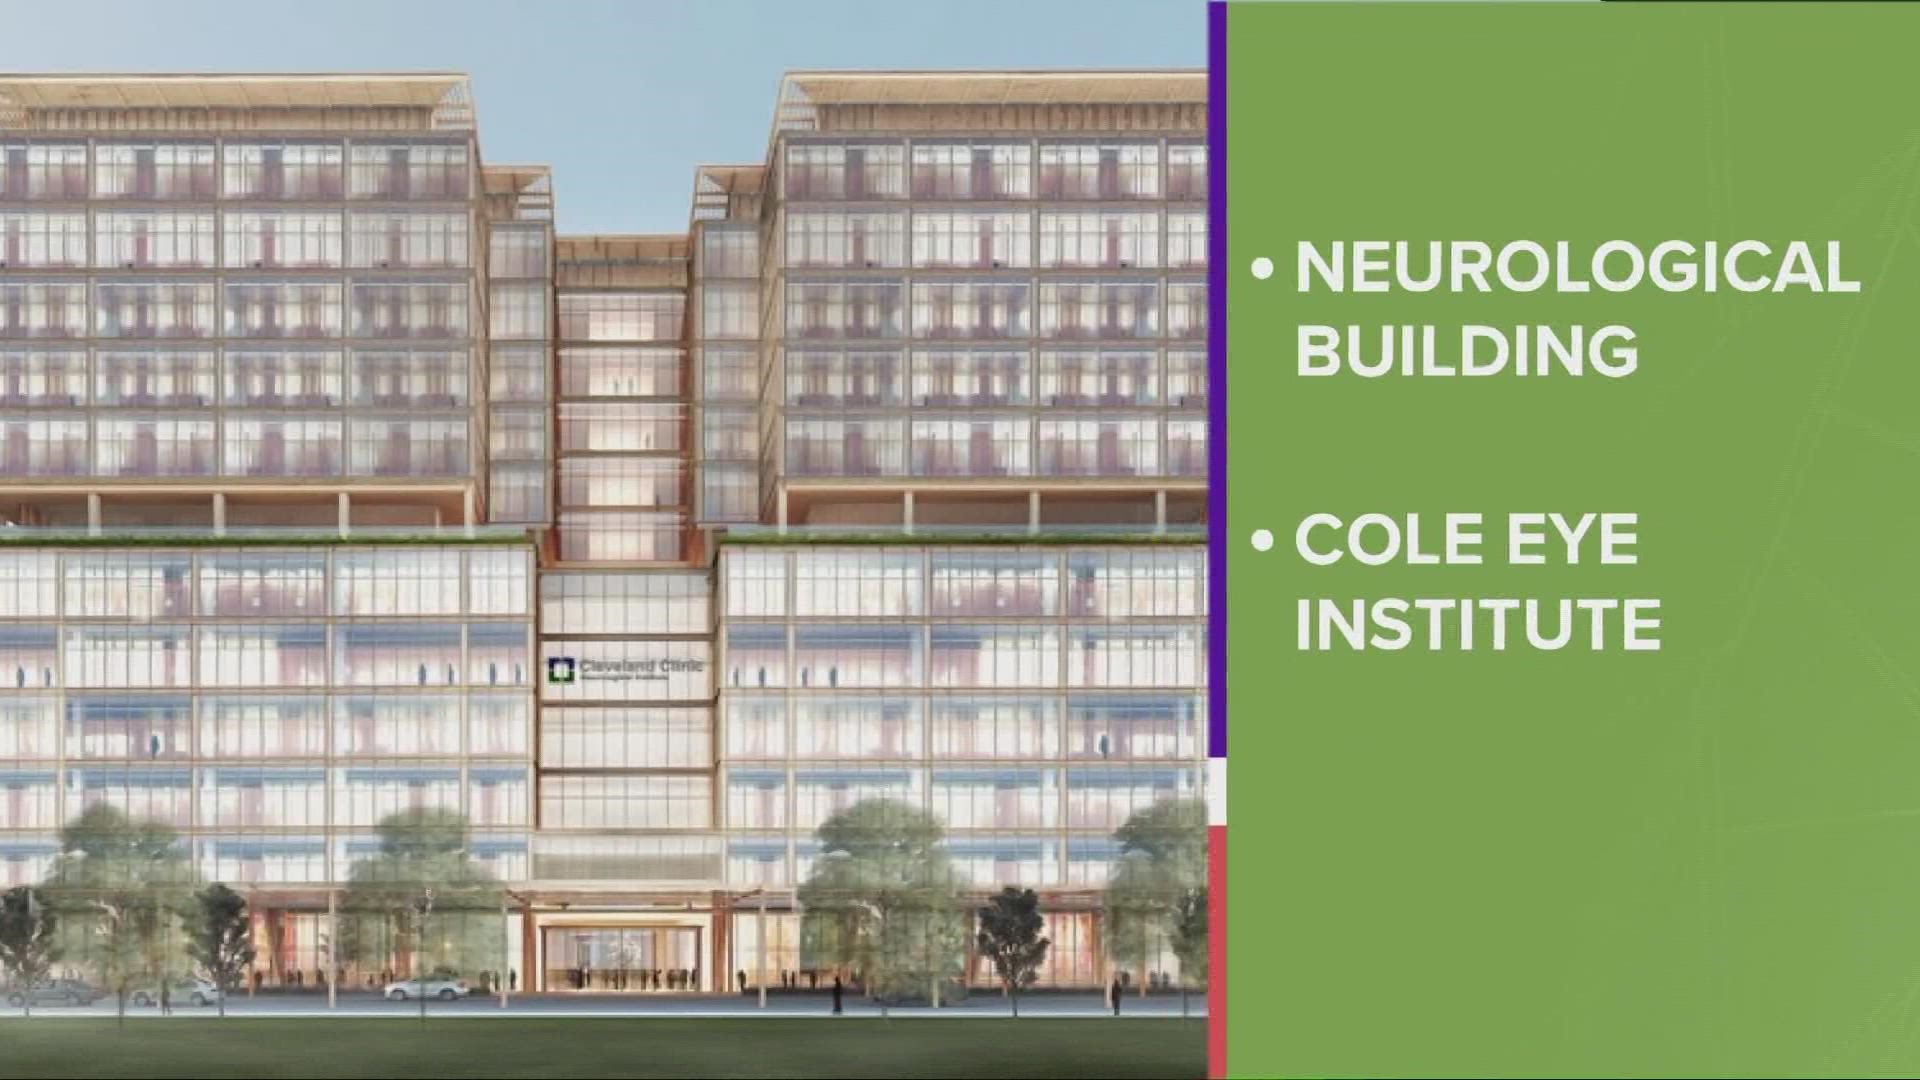 Work on the new Cleveland Clinic Neurological Institute building will begin later this year. The first inpatient is expected to be seen in 2026.